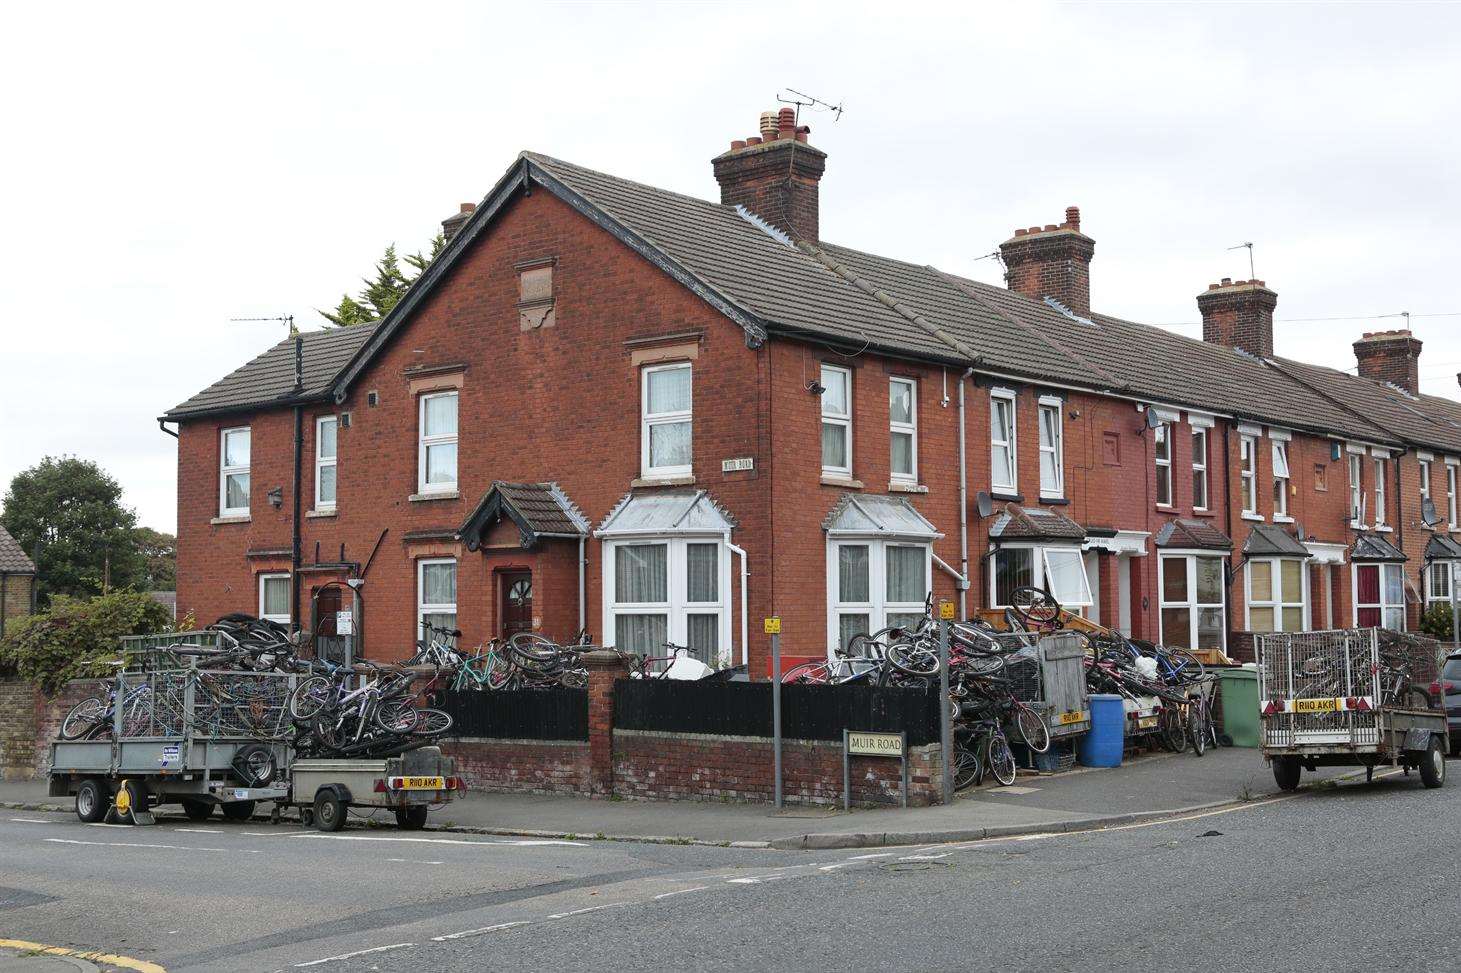 Hundreds of bikes piled high outside the house which has apparently become an eyesore